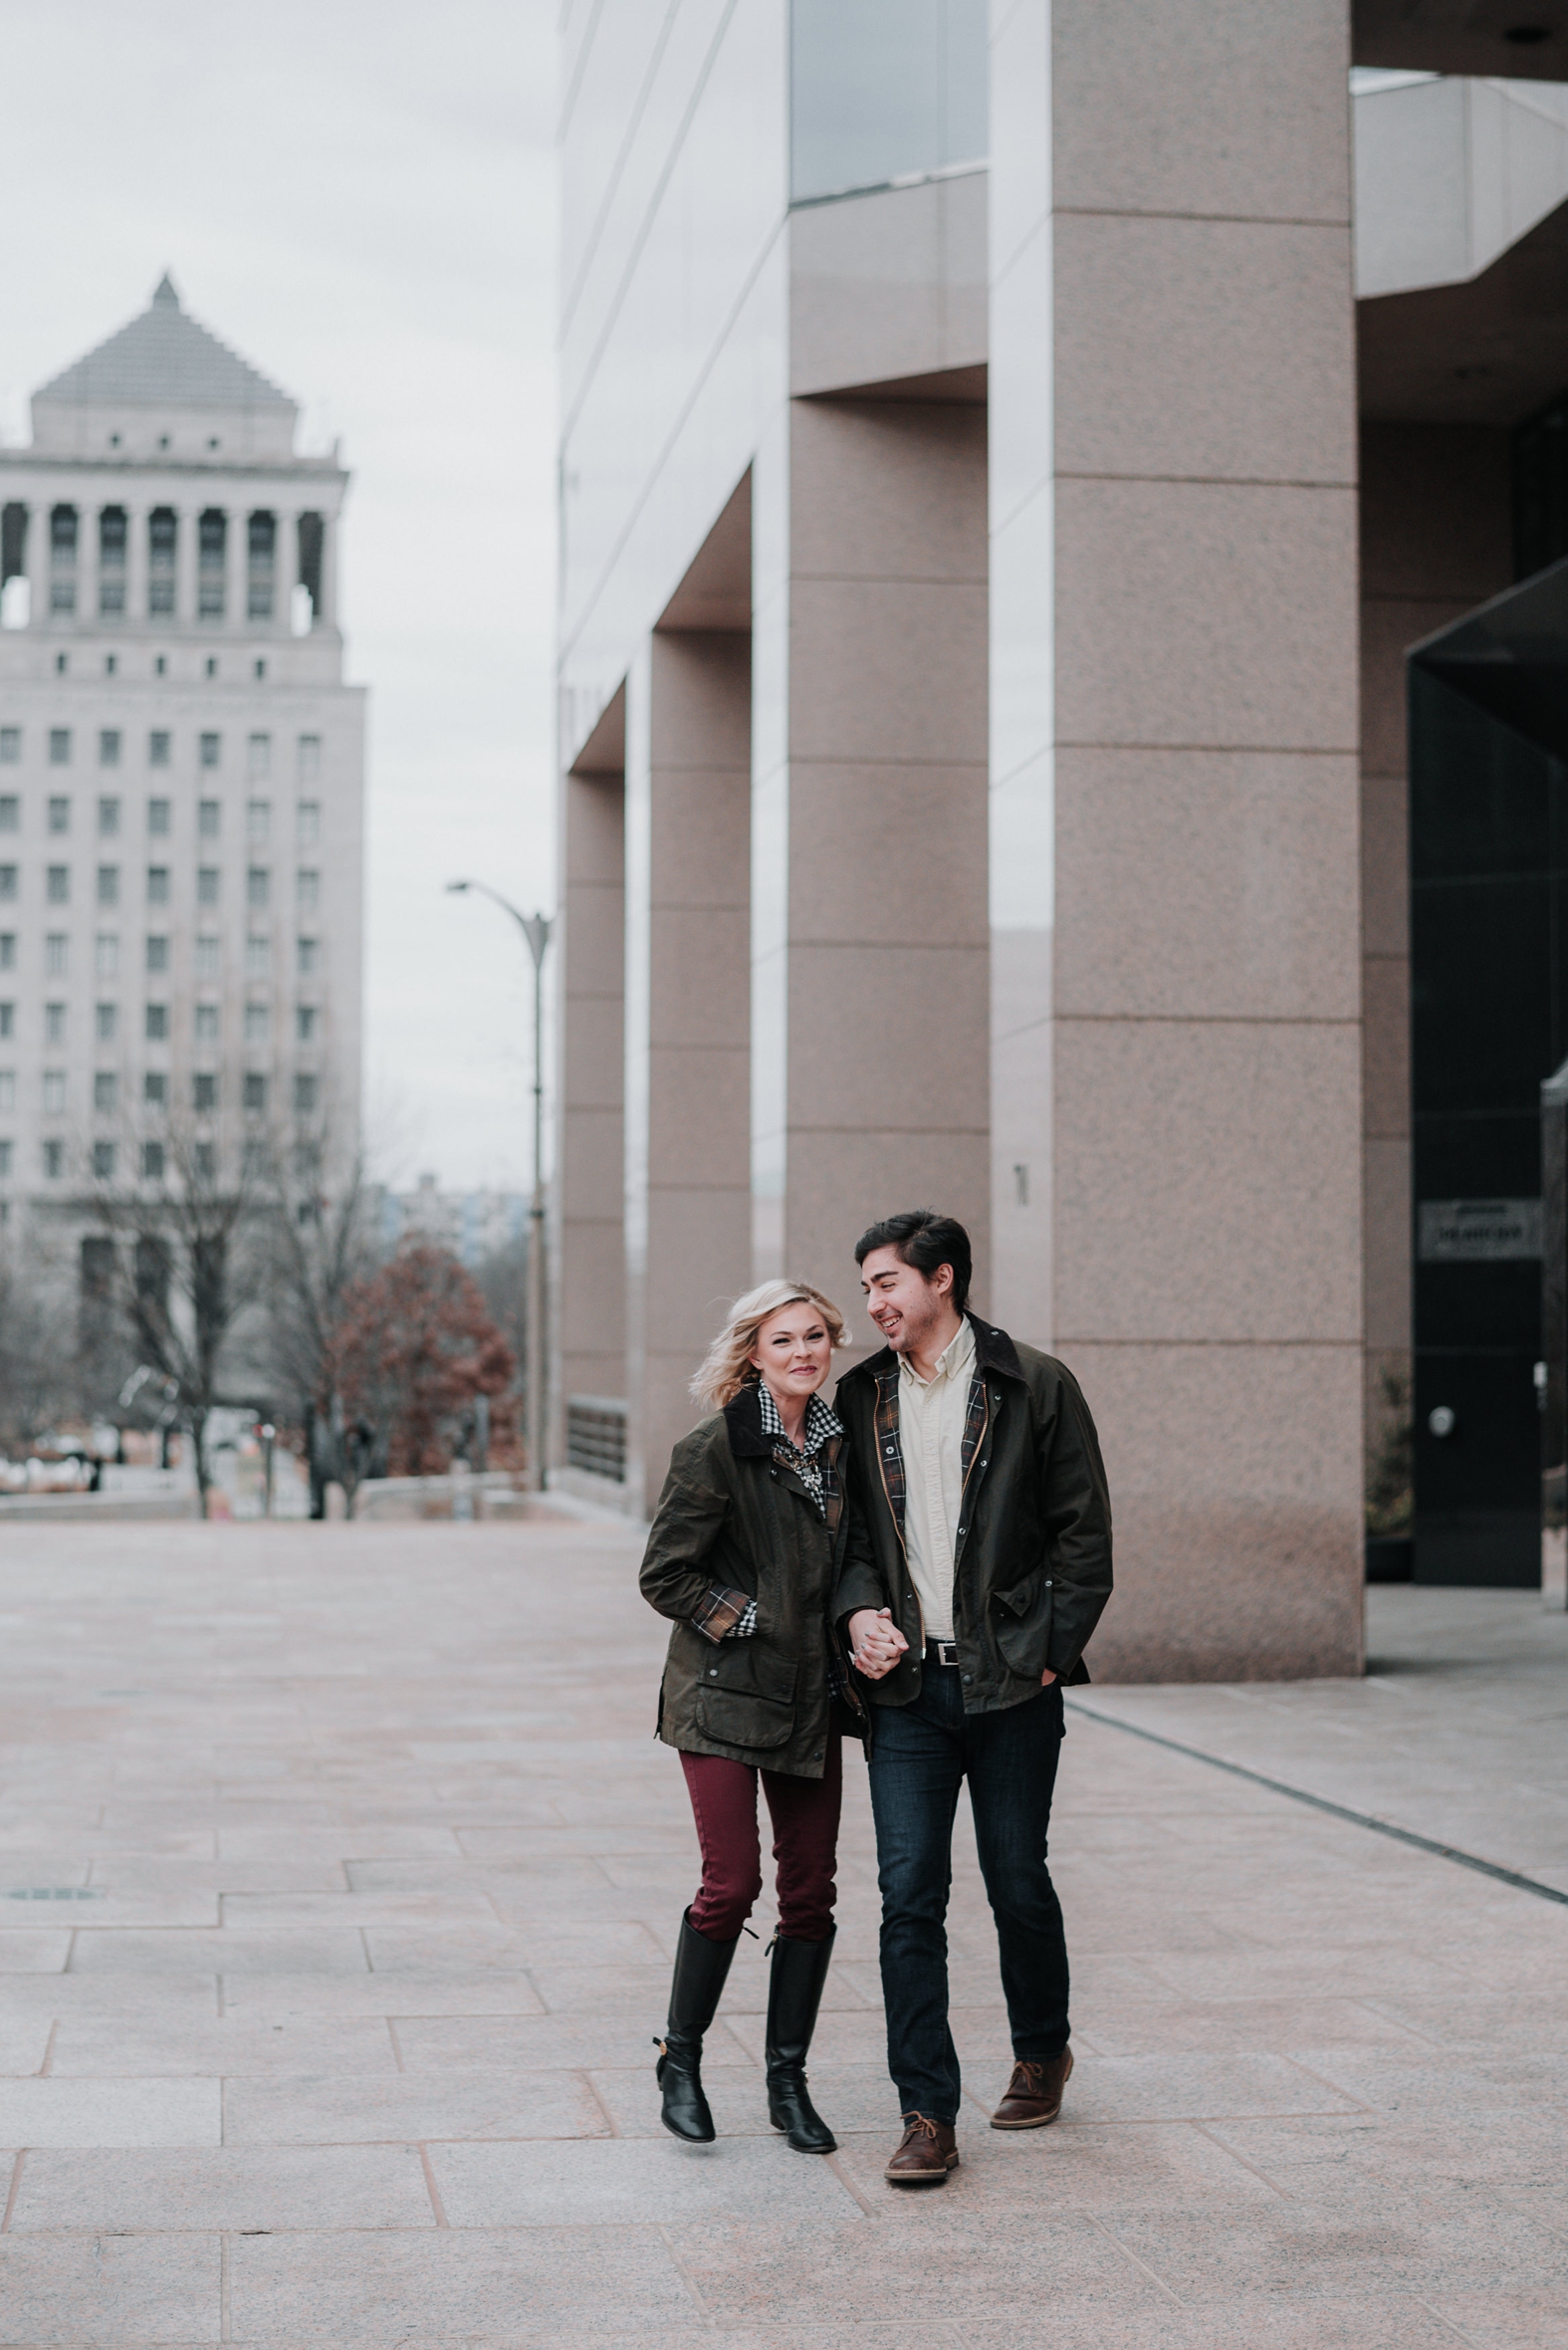 Bride and groom hold hands and laugh during their winter engagement photo session in St. Louis MO in jeans, boots, and plaid shirts.